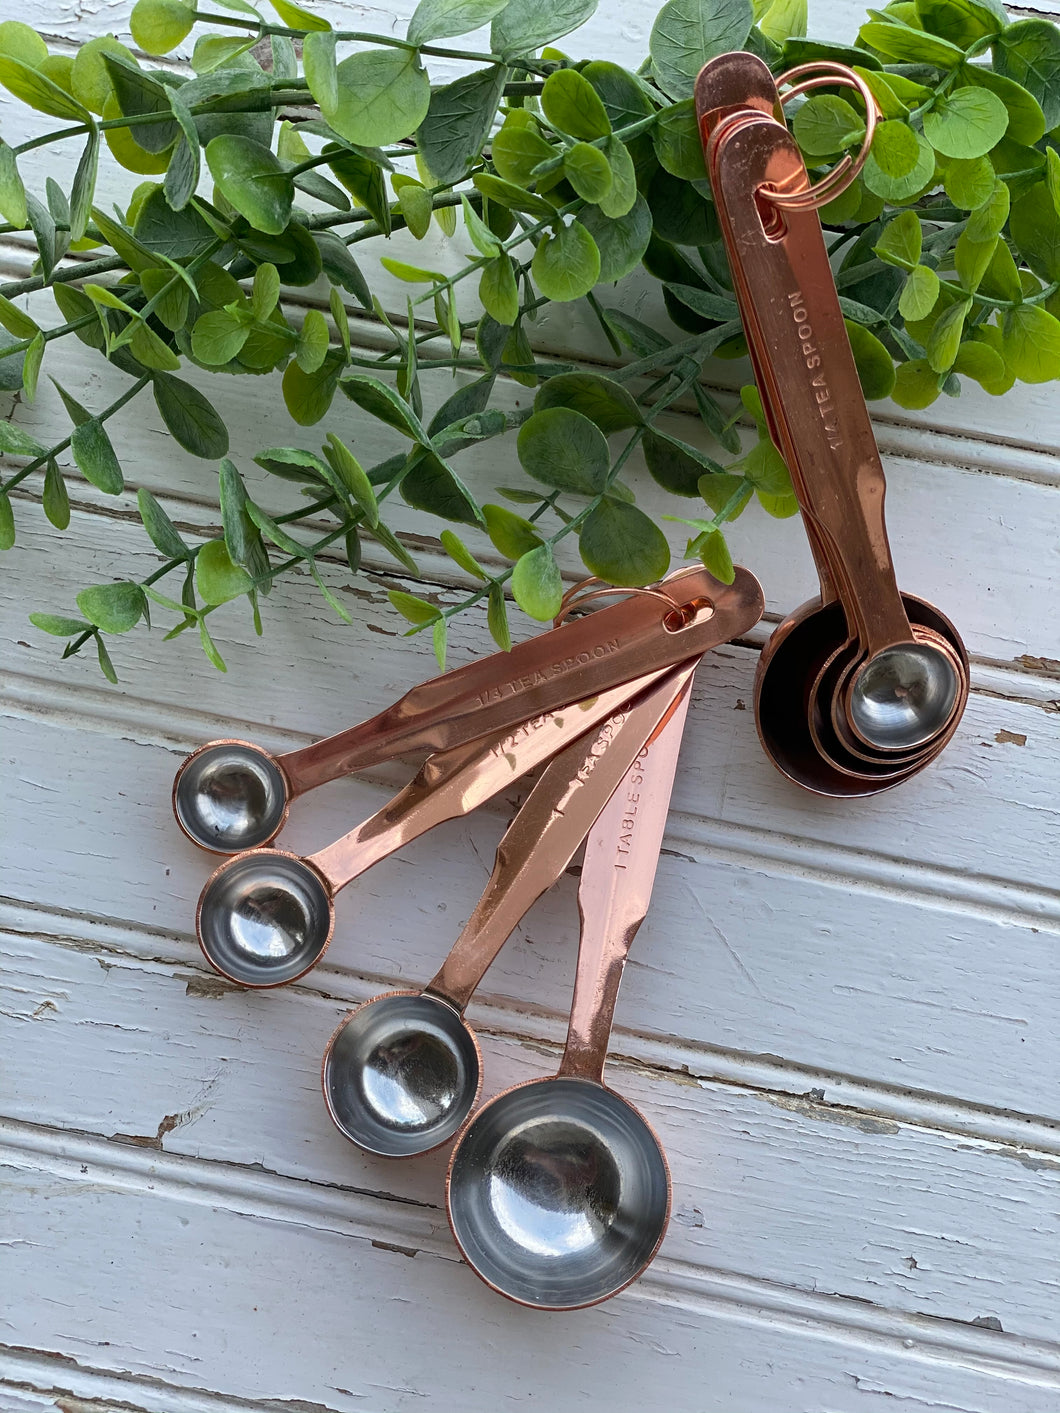 Copper Finish Measuring Spoons